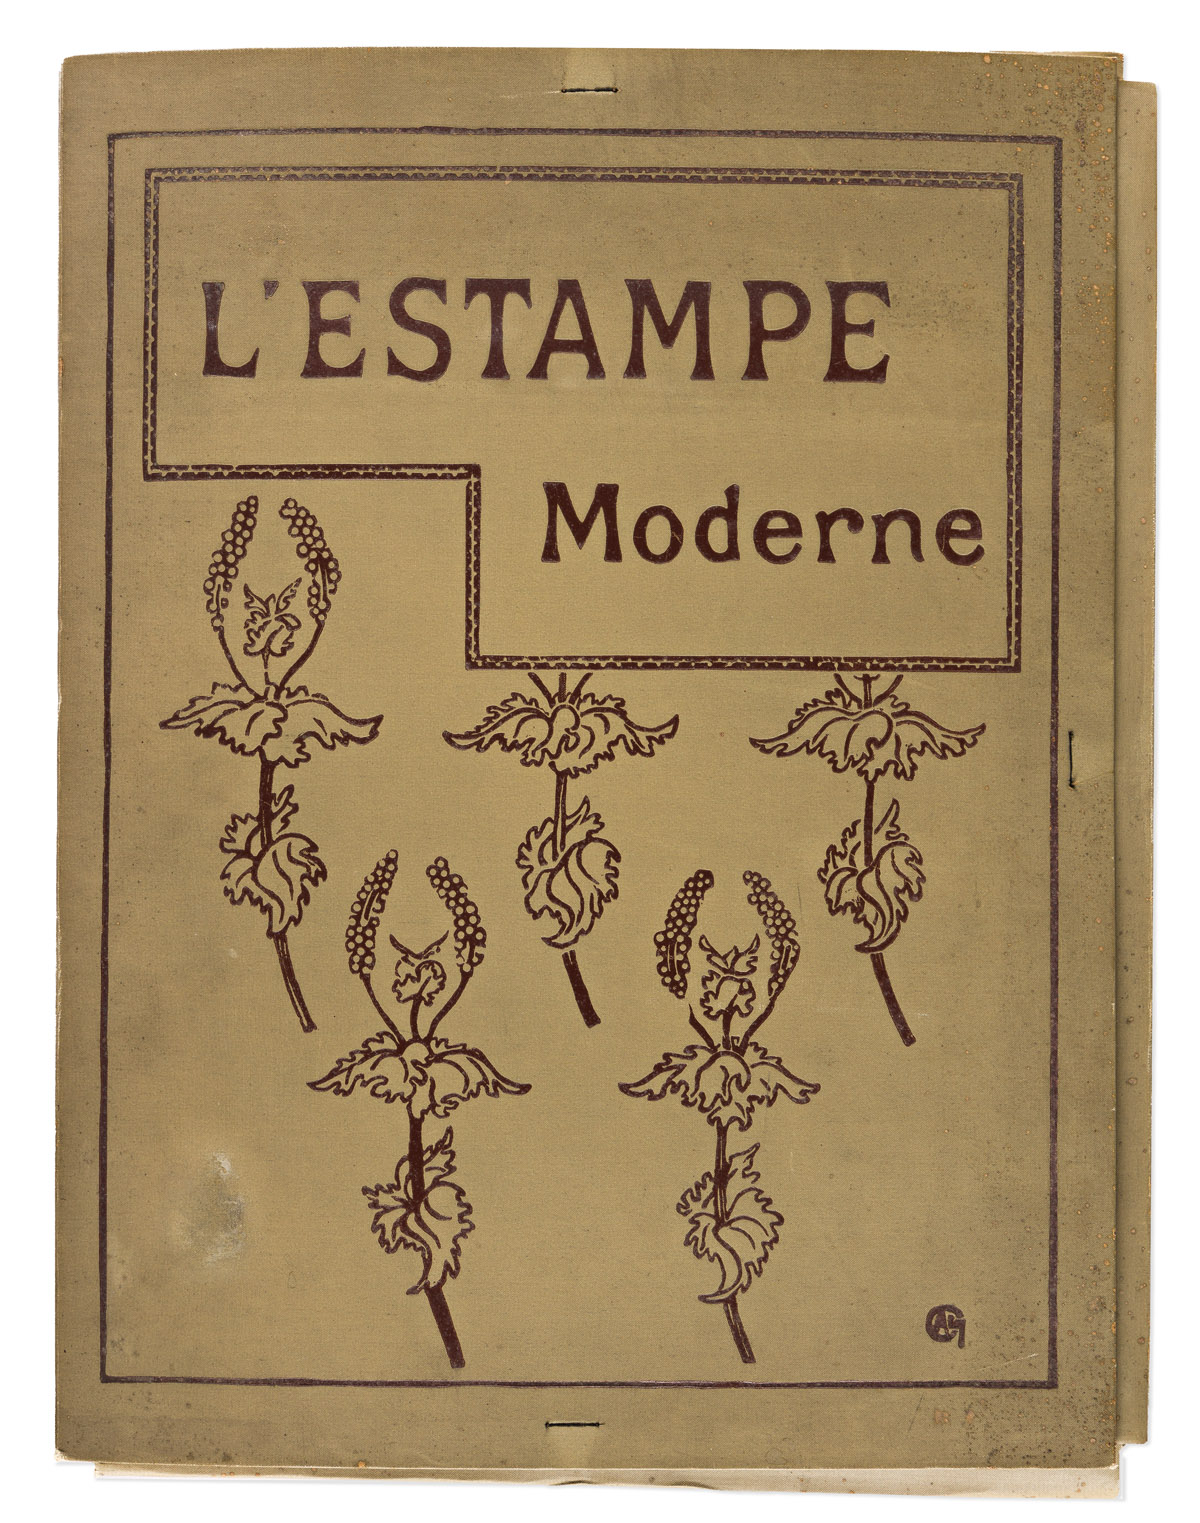 COVER BY ALEXANDRE CHARPENTIER (1856-1909).  LESTAMPE MODERNE. Complete set of 100 plates. 1897-1899. Sizes vary, each approximately 1